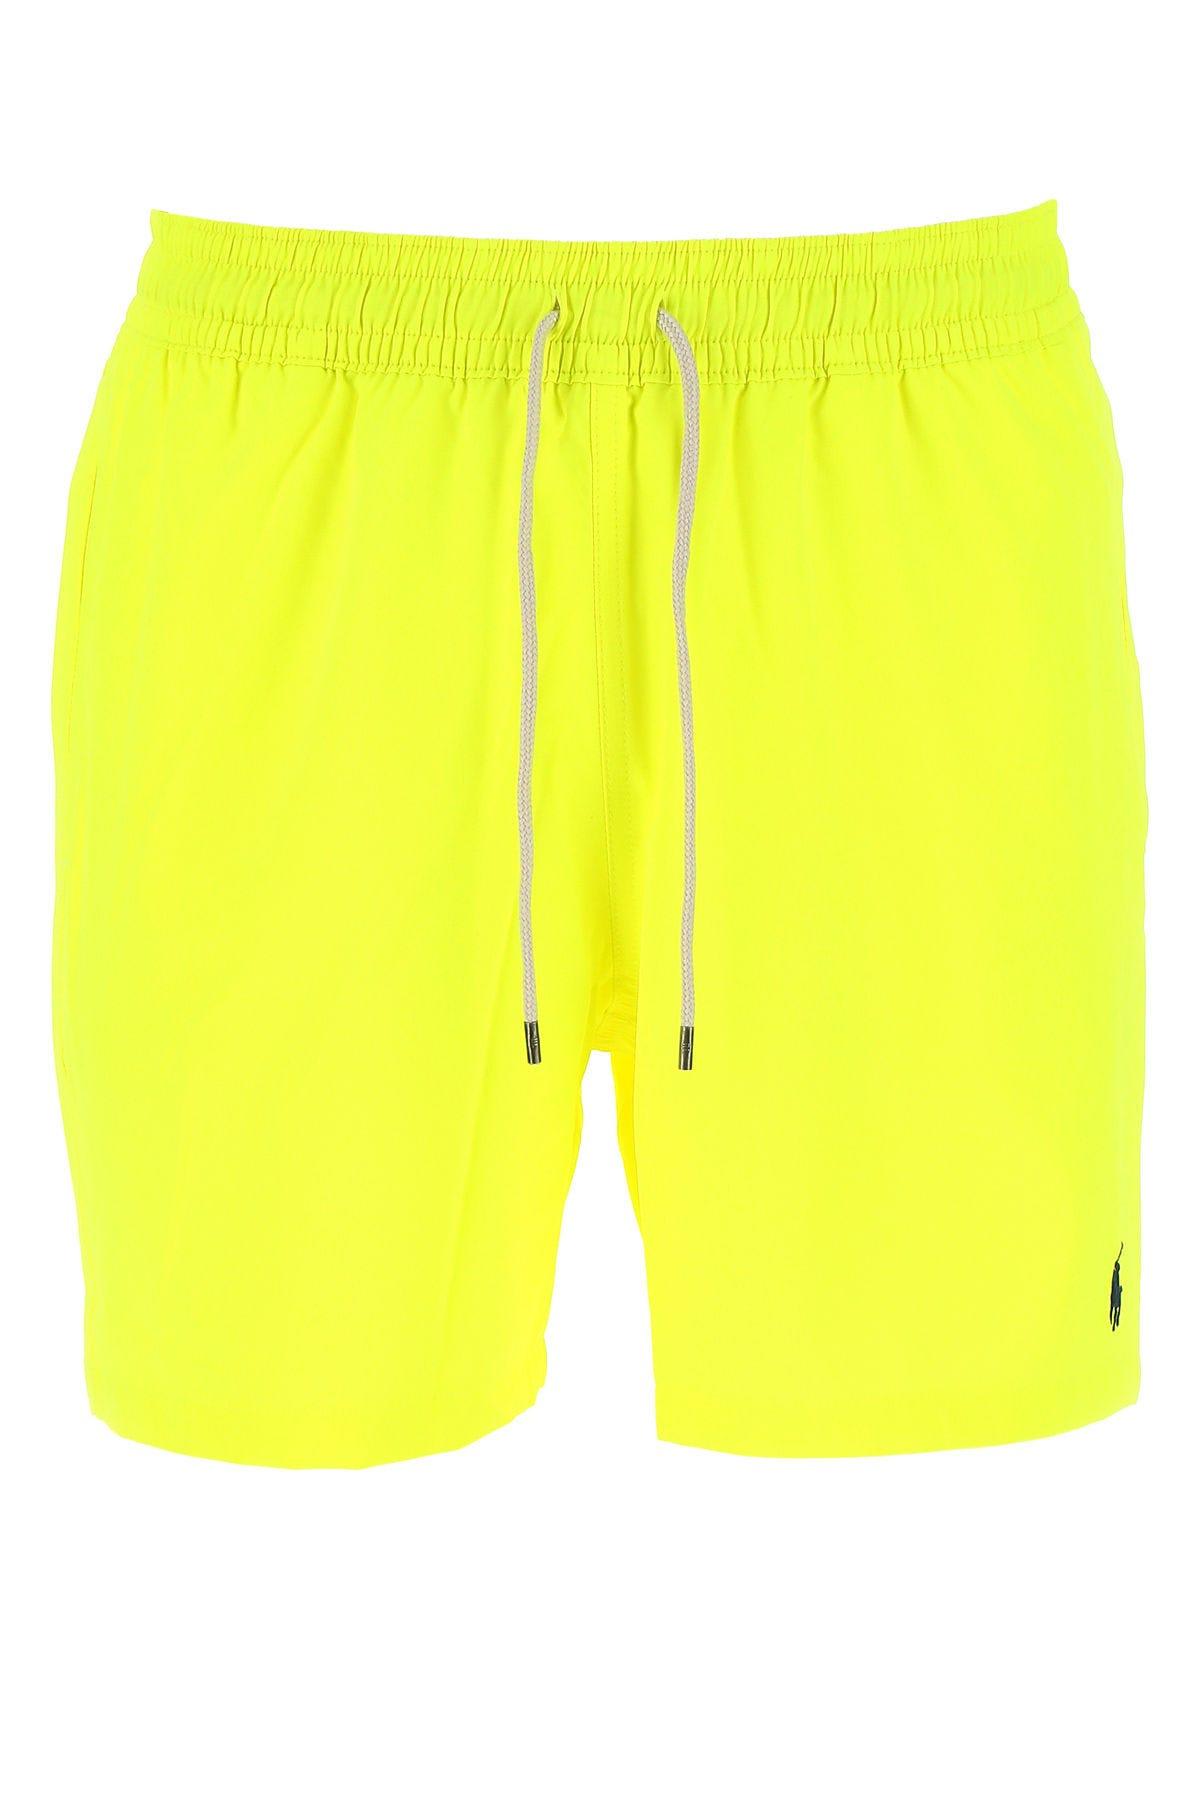 POLO RALPH LAUREN FLUO YELLOW STRETCH POLYESTER SWIMMING SHORTS POLO RALPH LAUREN